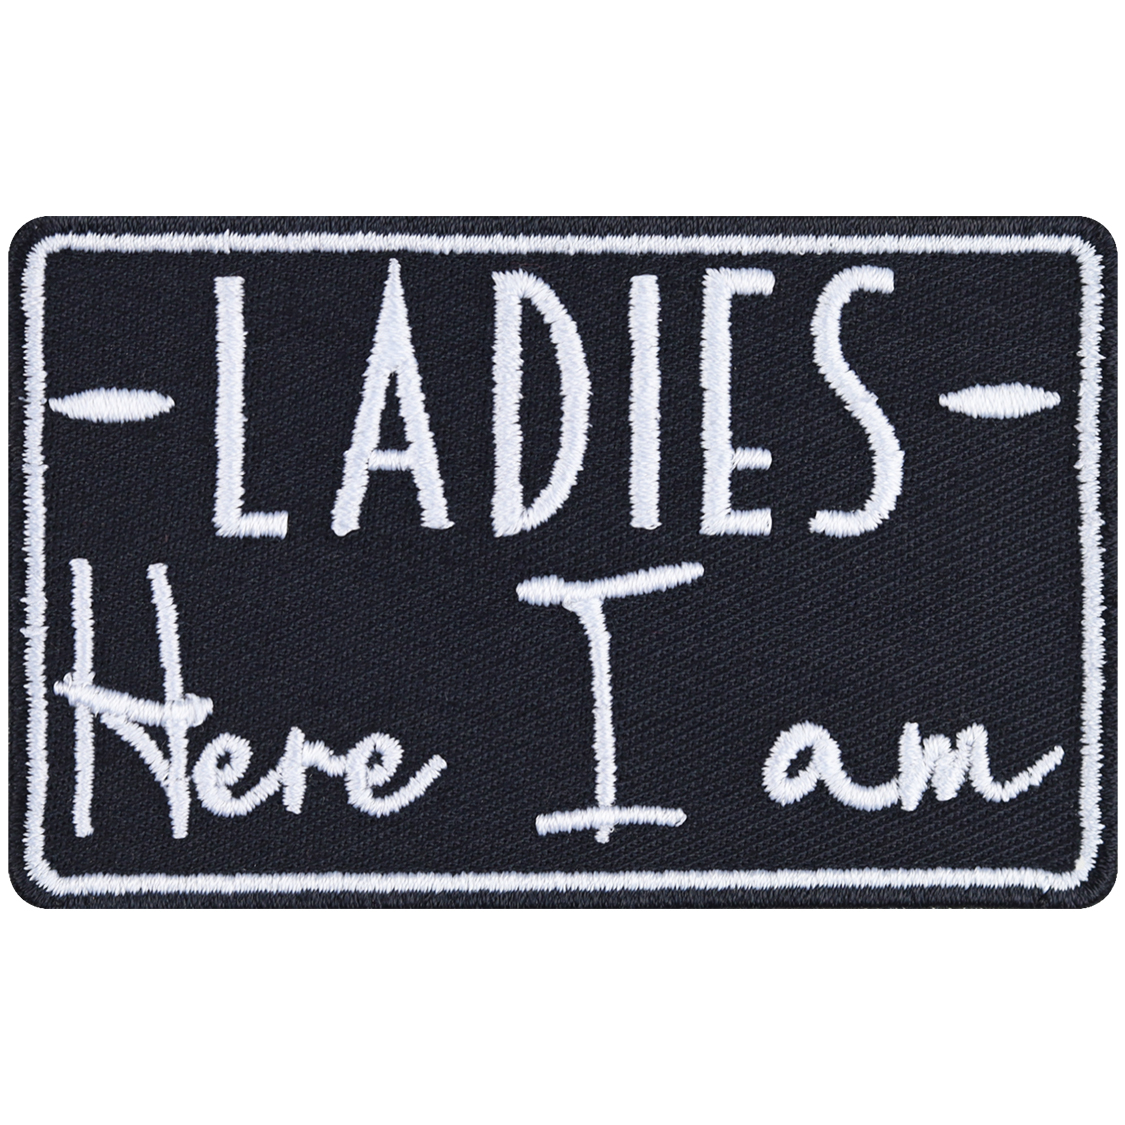 Ladies - here I am - Patch